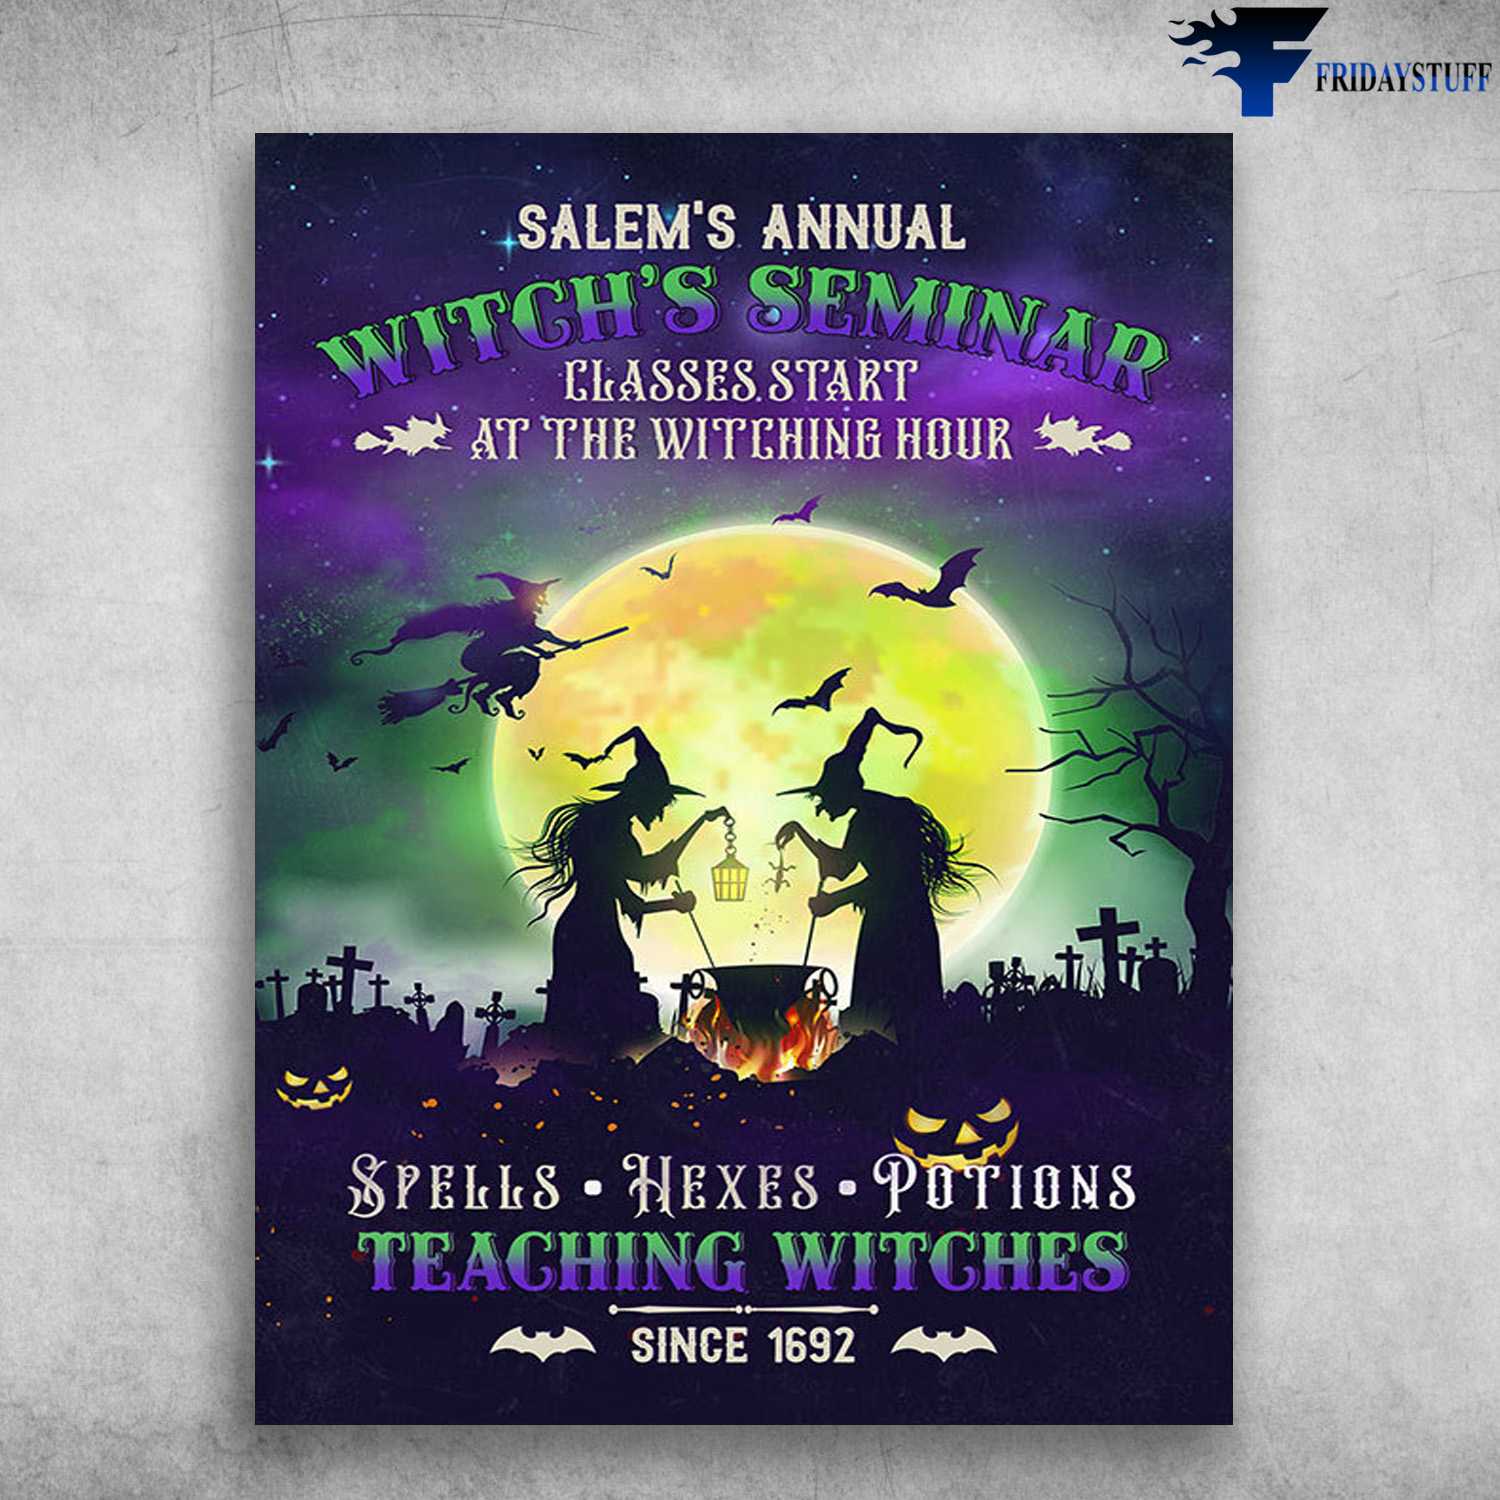 Hallween Poster, Witch And Pumpkin - Salem's Annual, Witch's Seminar, Classes Start At The Witching Hour, Spells, Hexes, Potions, Teaching Witches